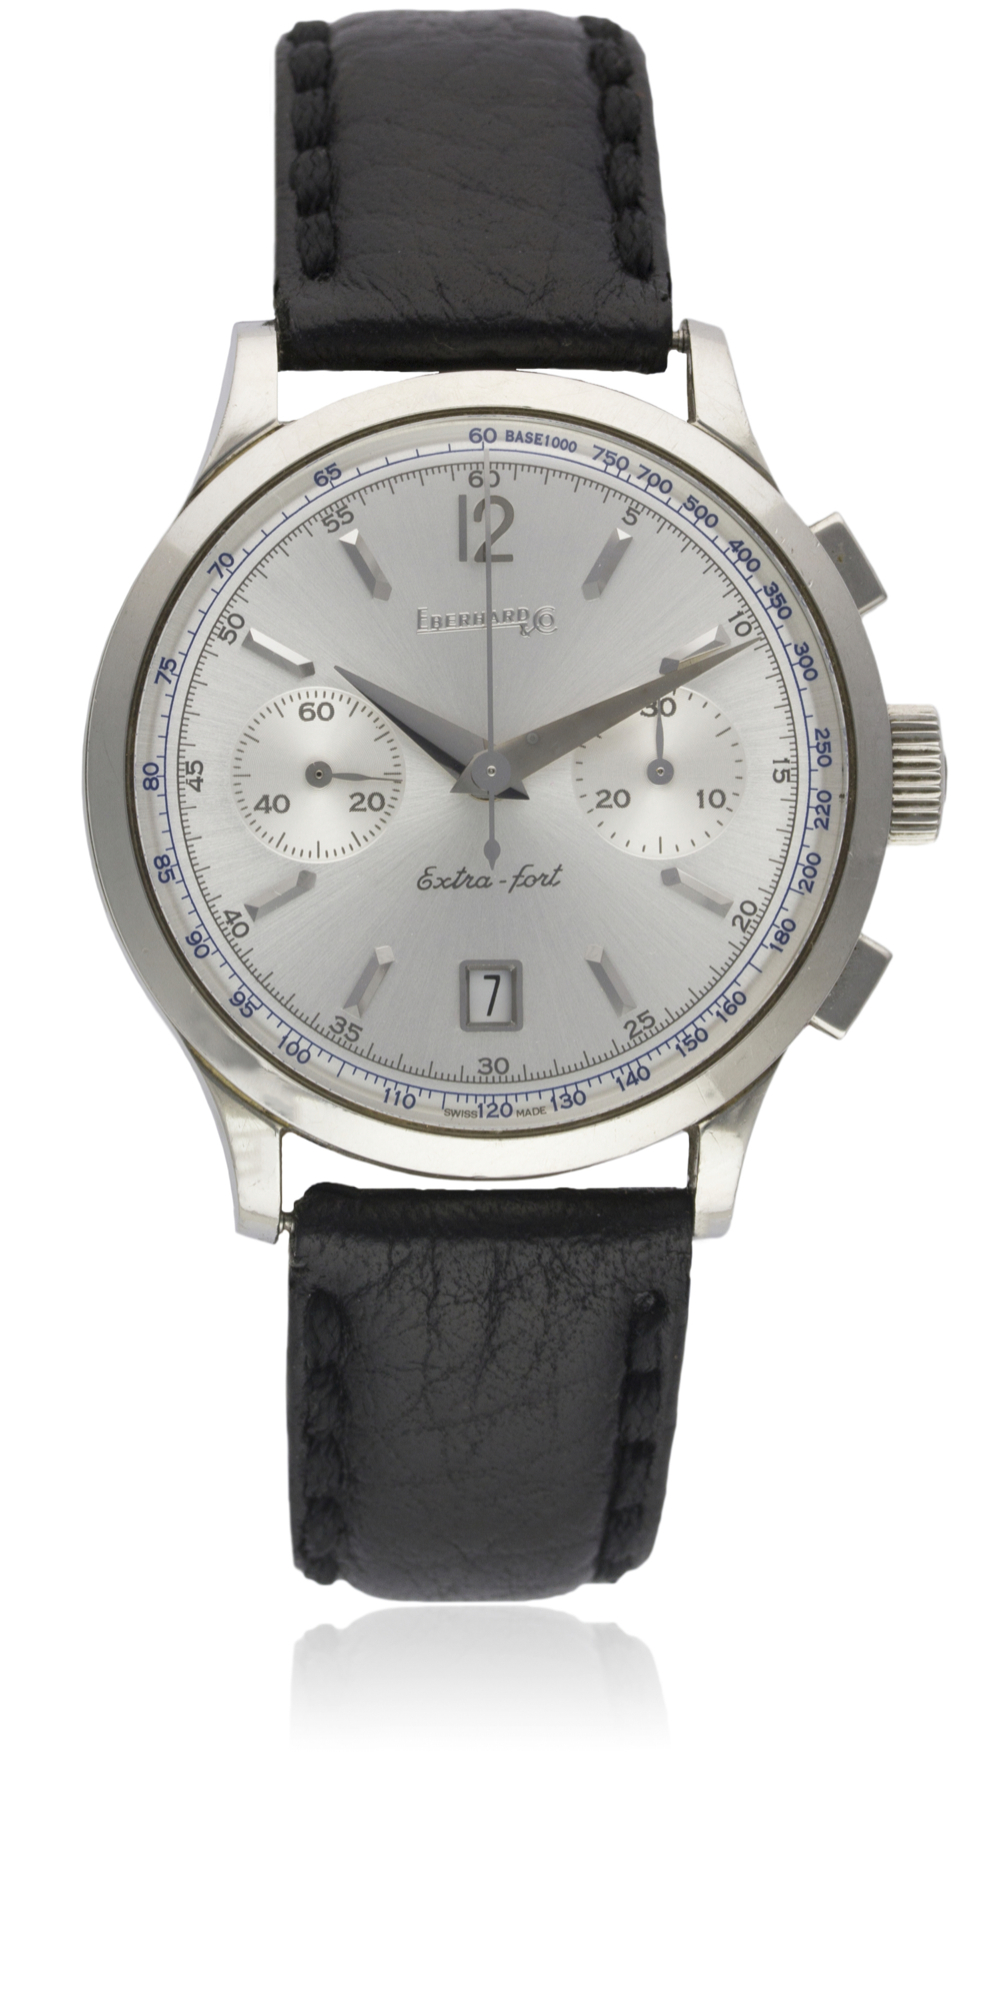 A GENTLEMAN'S STAINLESS STEEL EBERHARD & CO EXTRA FORT AUTOMATIC CHRONOGRAPH WRIST WATCH DATED 2002, - Image 2 of 2